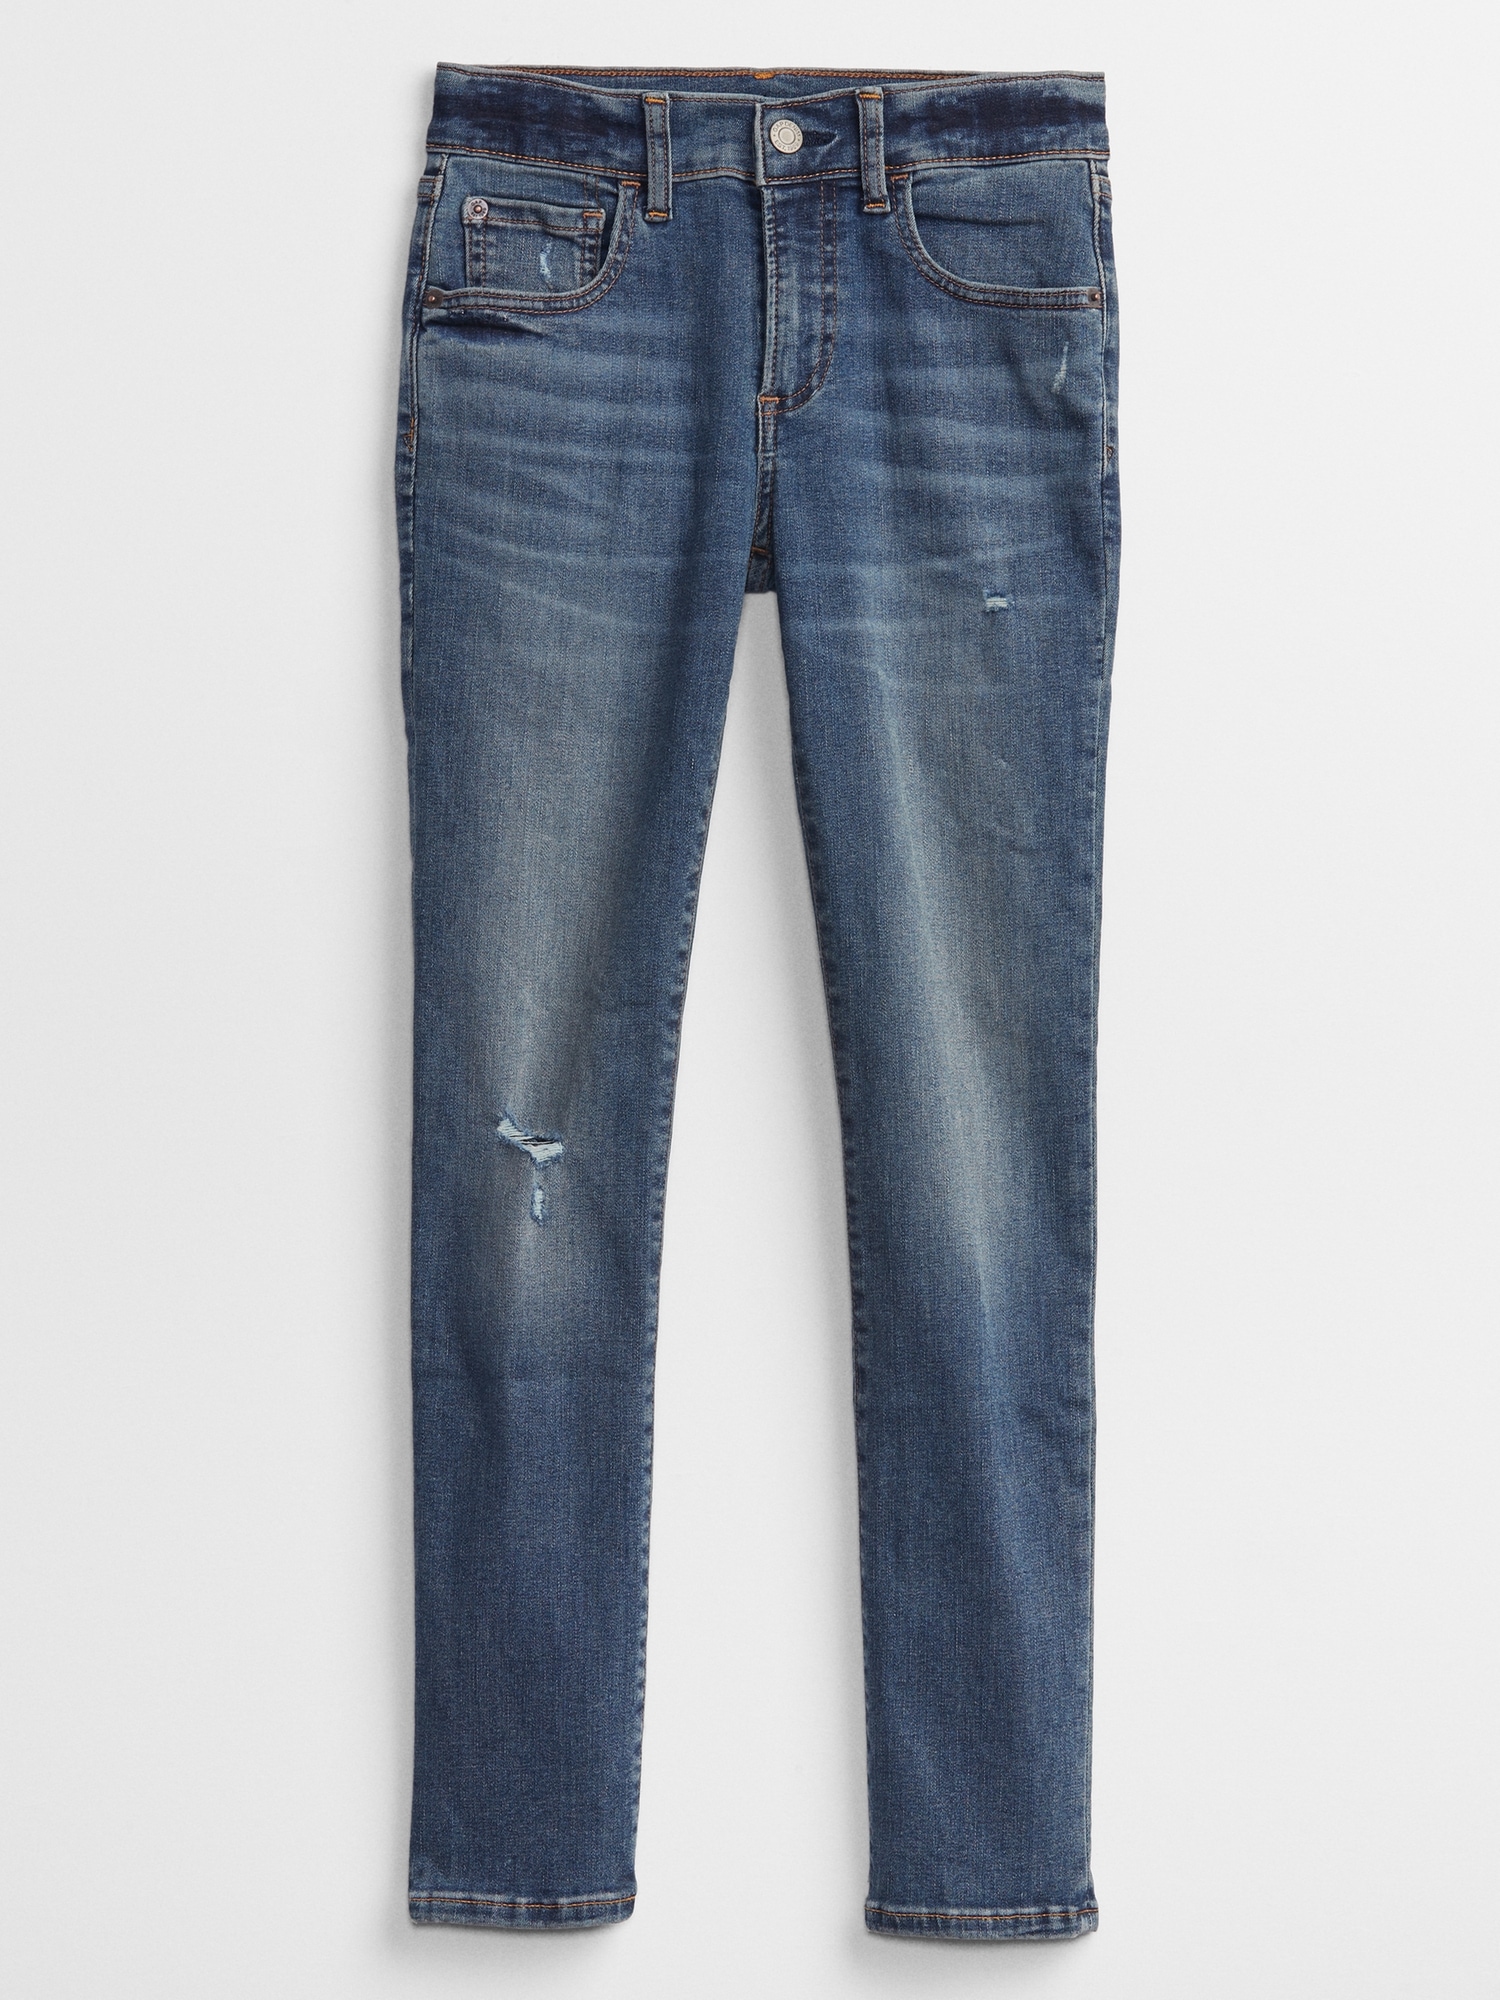 Kids Stacked Skinny Jeans with Washwell | Gap Factory